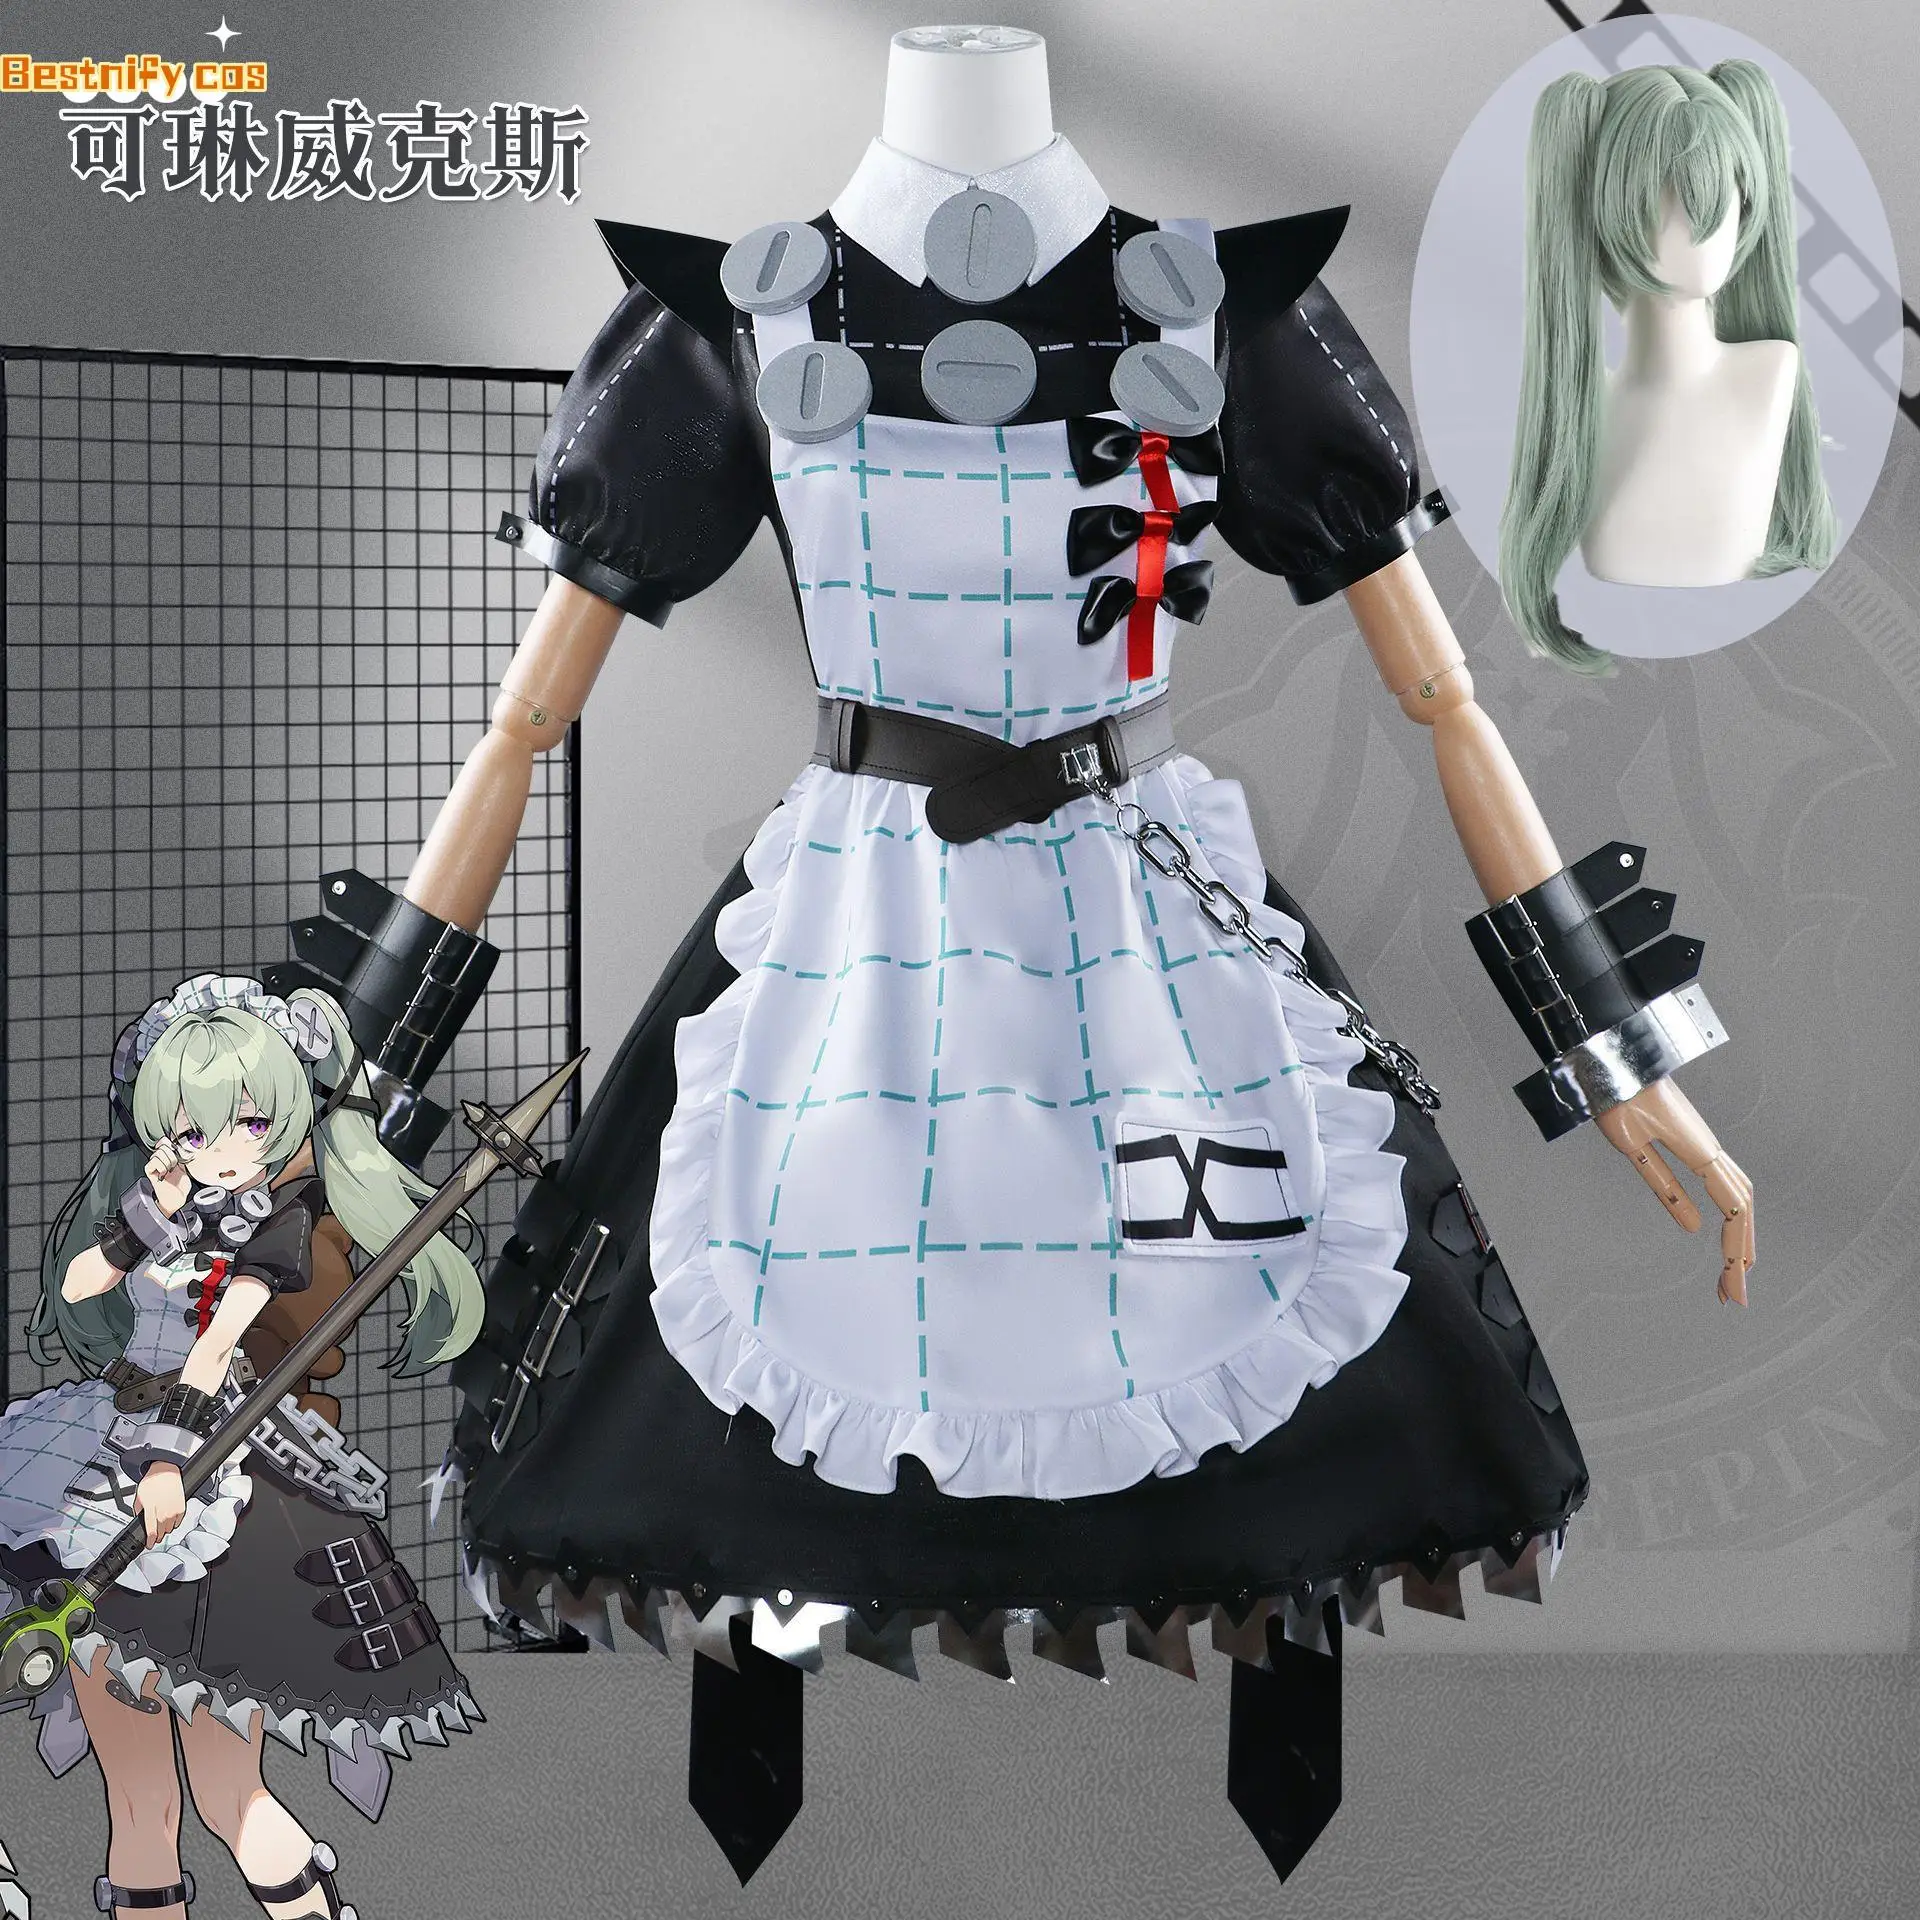 

Game ZZZ Zenless Zone Zero Corin Wickes Maid Dress Cosplay Costume Wig New Game Anime Cosplay Event Party Women Cute Uniforms